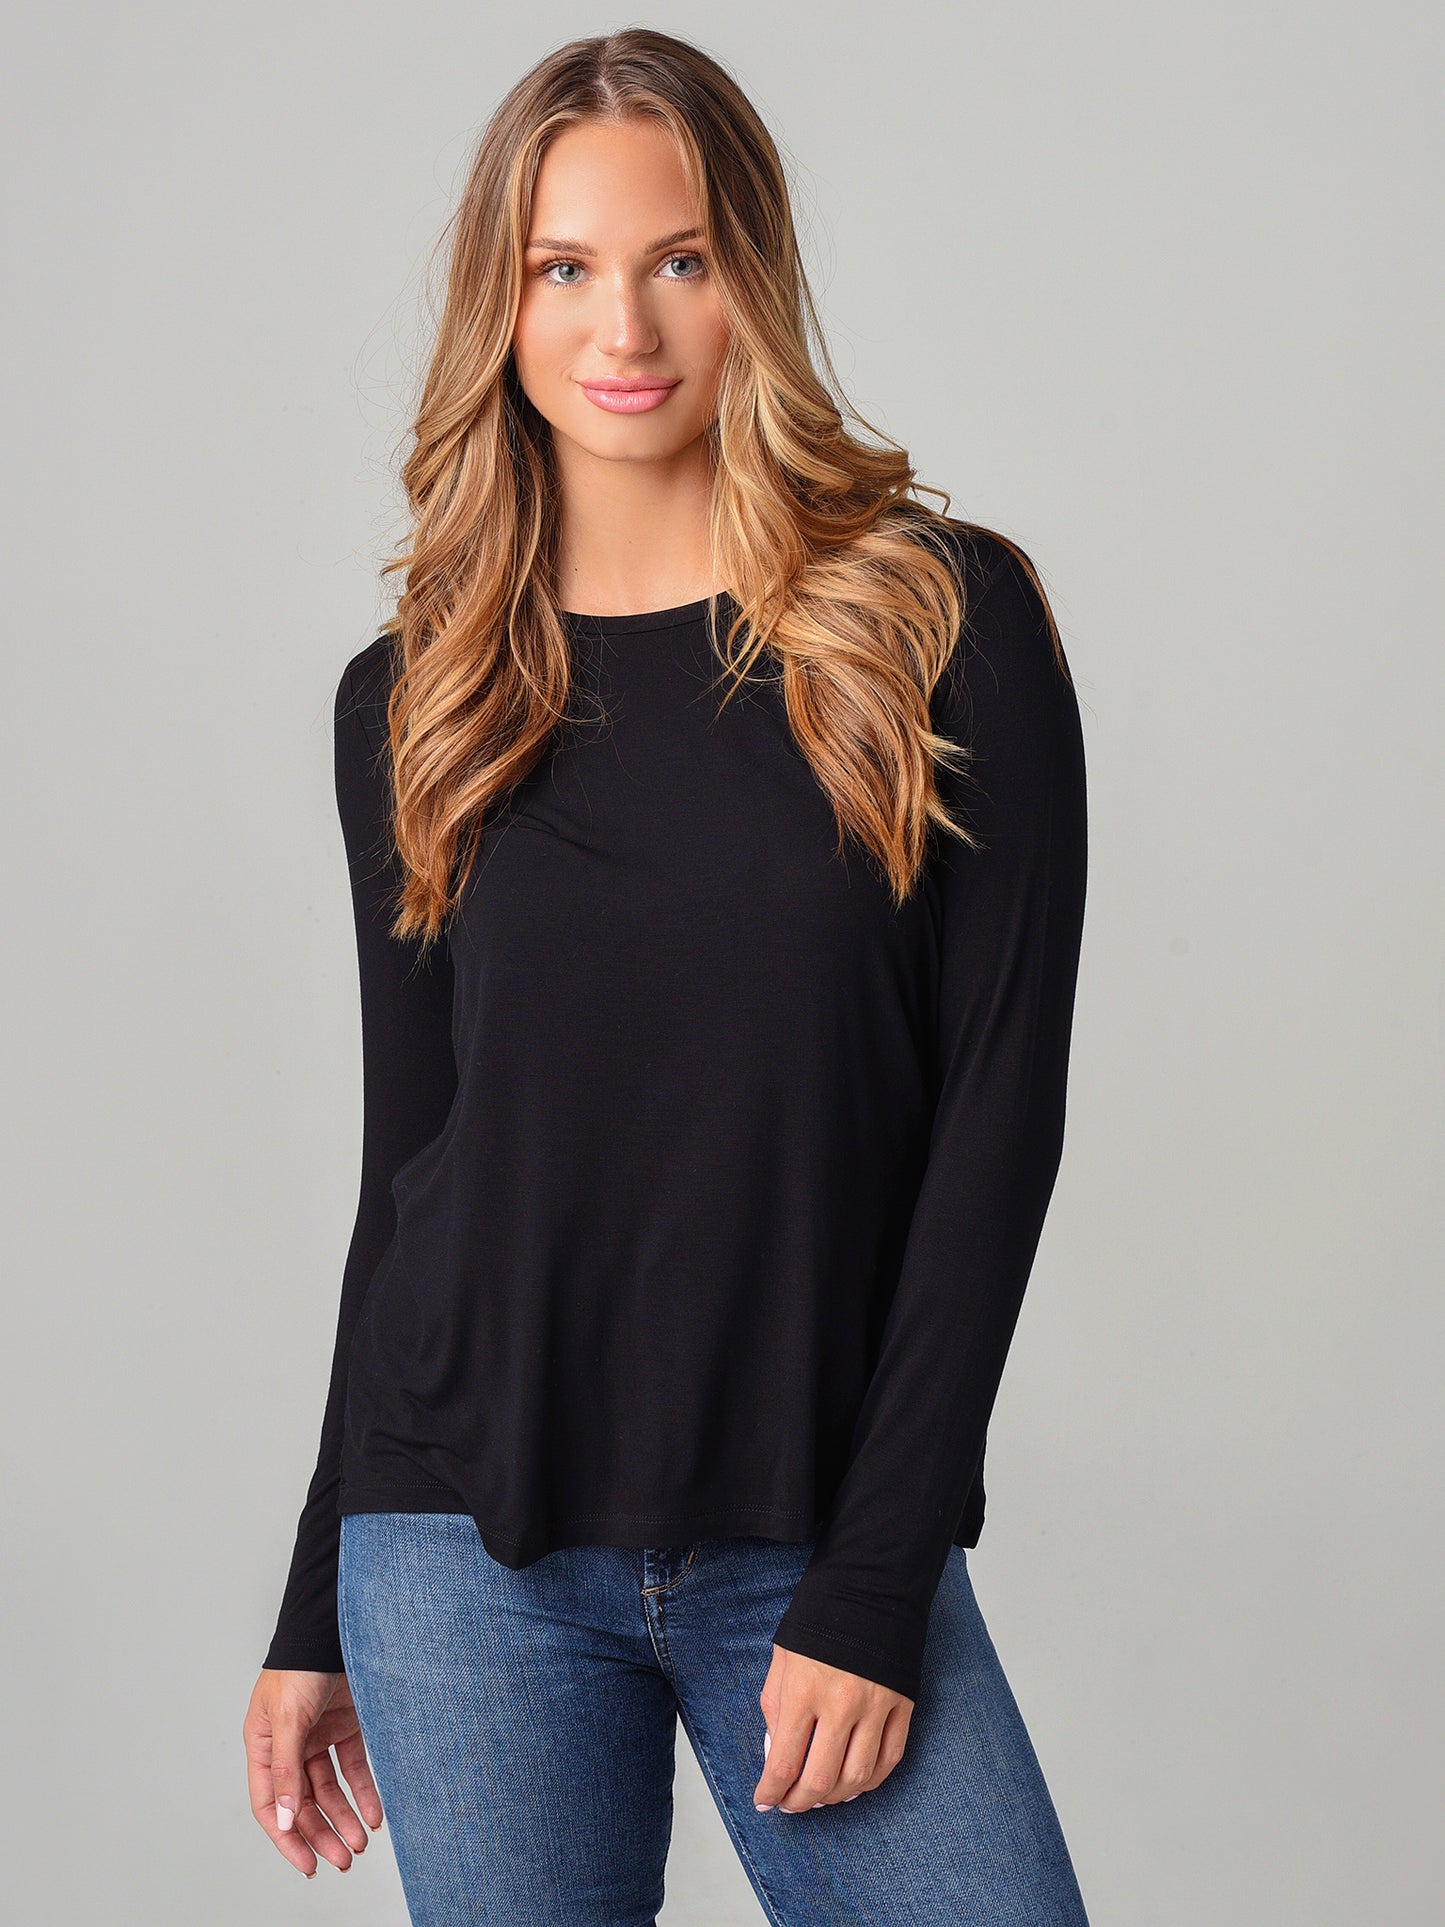 Majestic Women's Extrafine Long Sleeve Crew Tee With Back Pleat